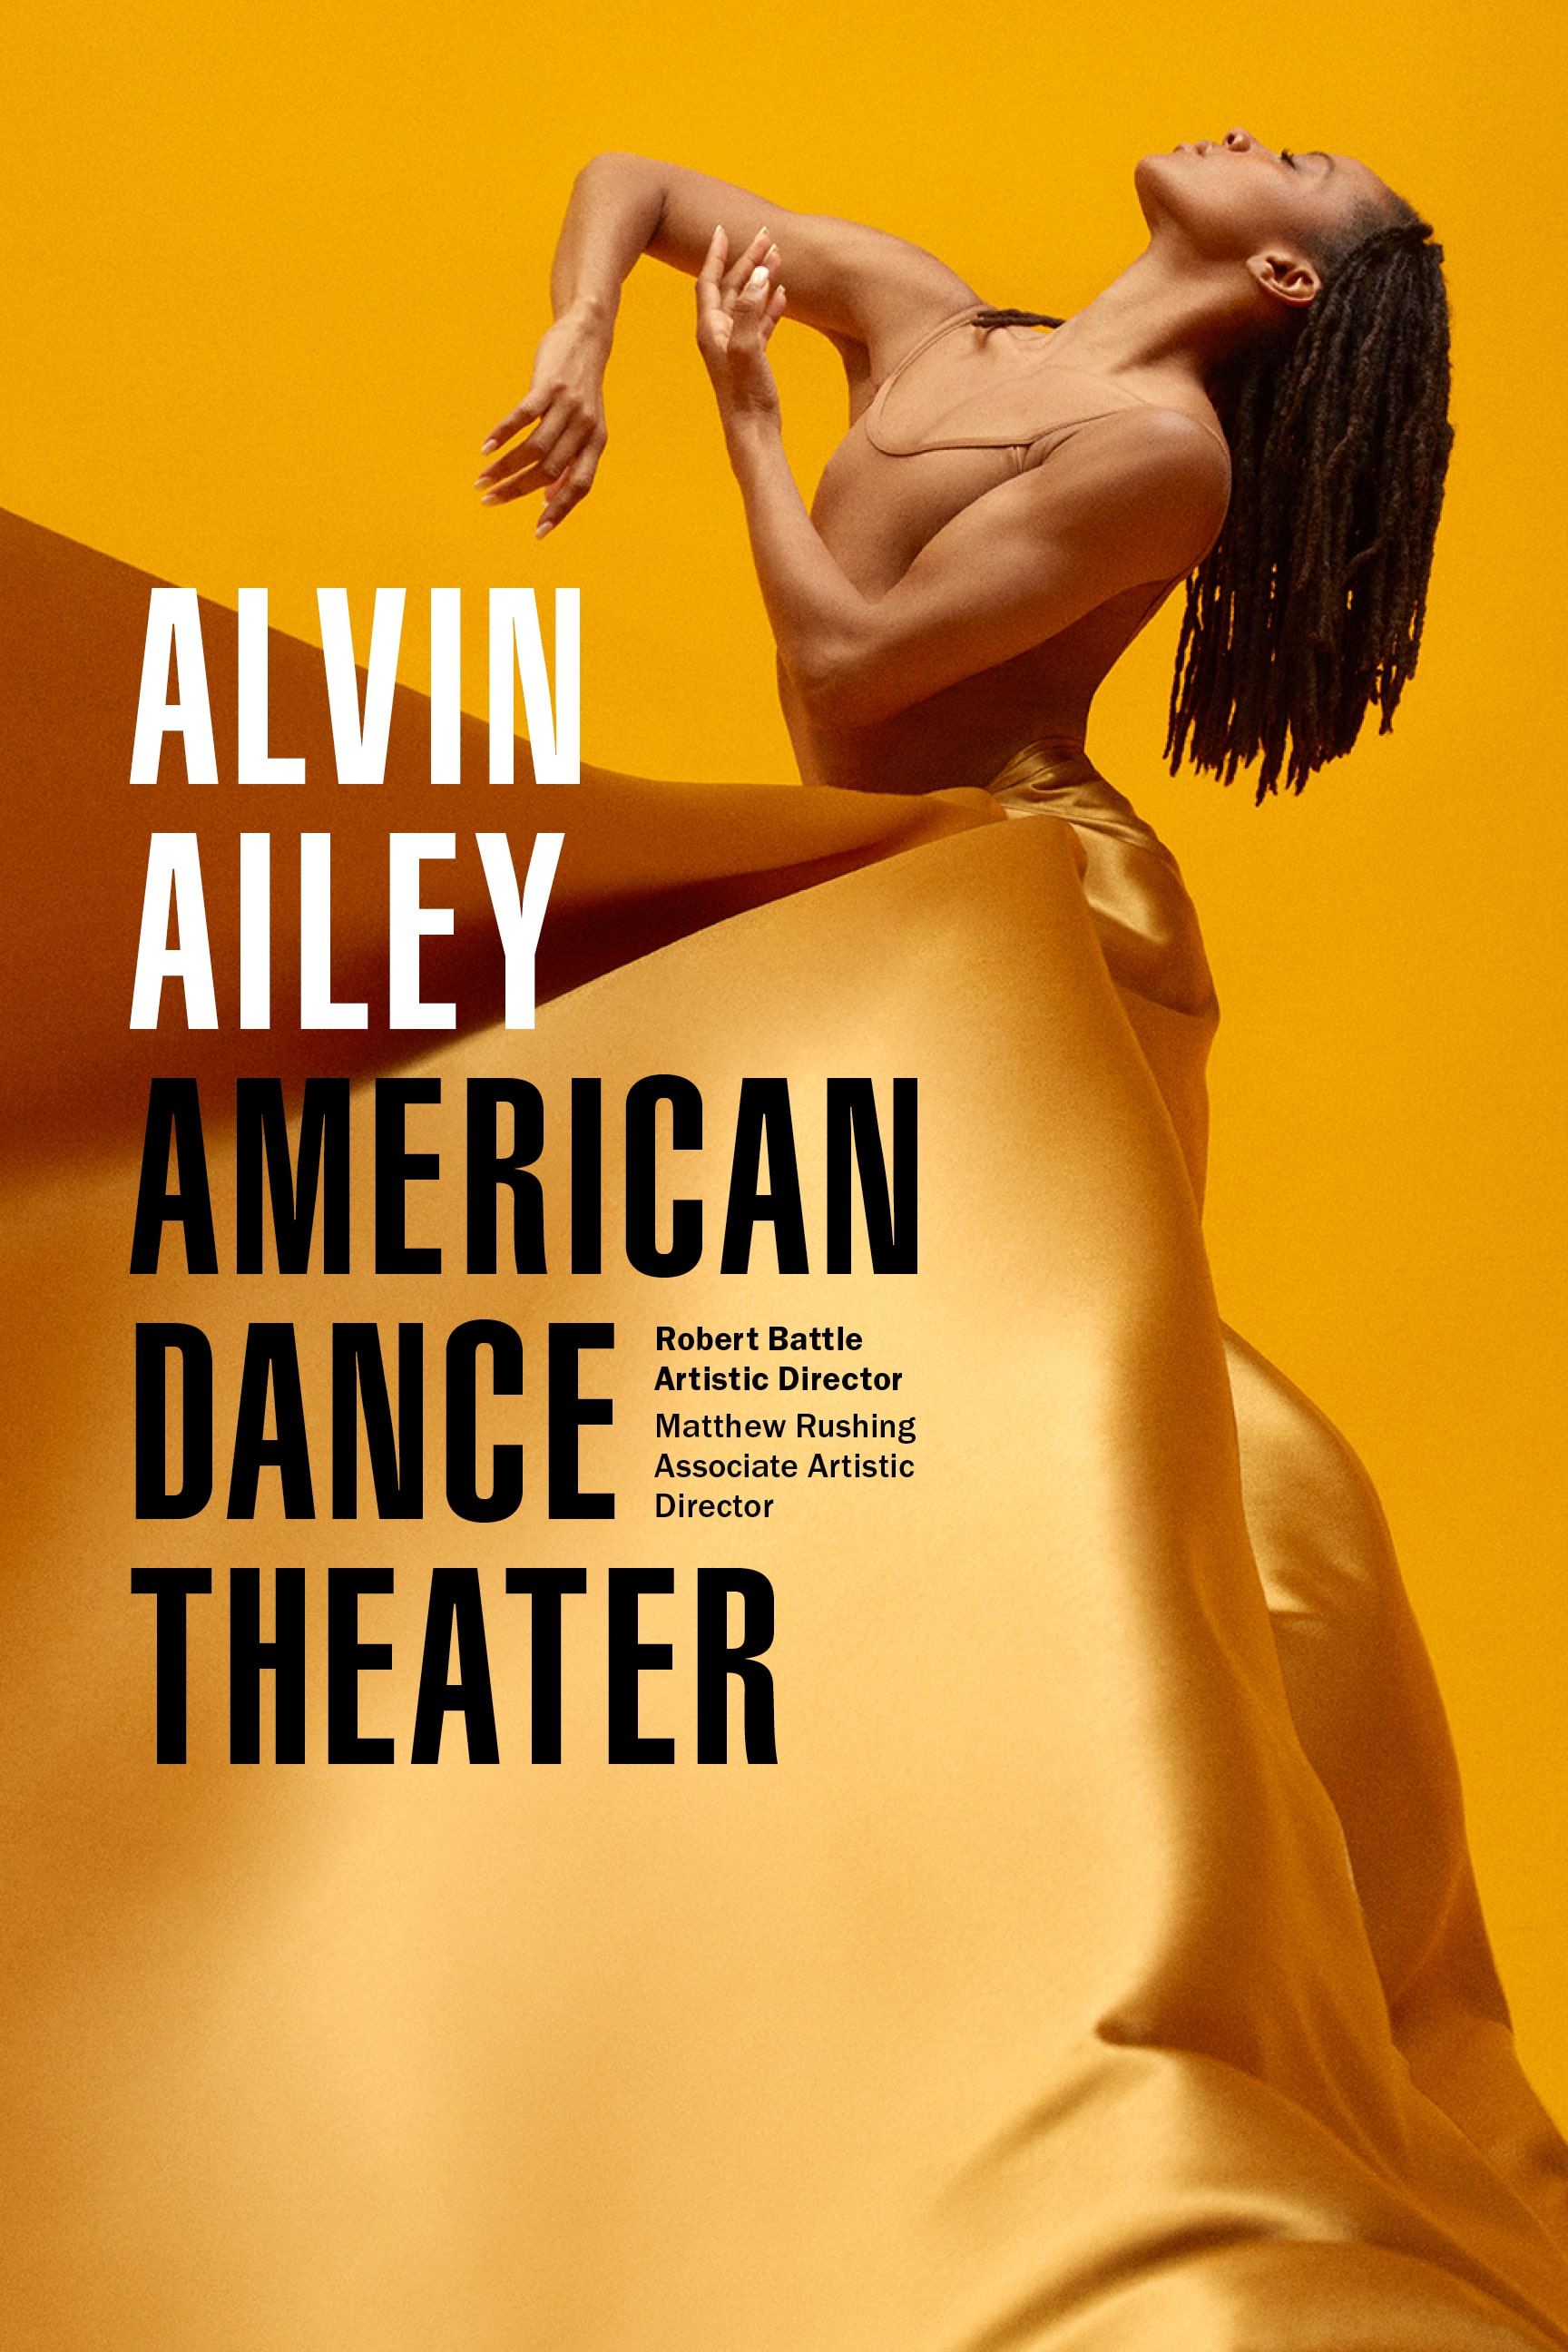 AAADT Community Group Kansas City Friends of Alvin Ailey